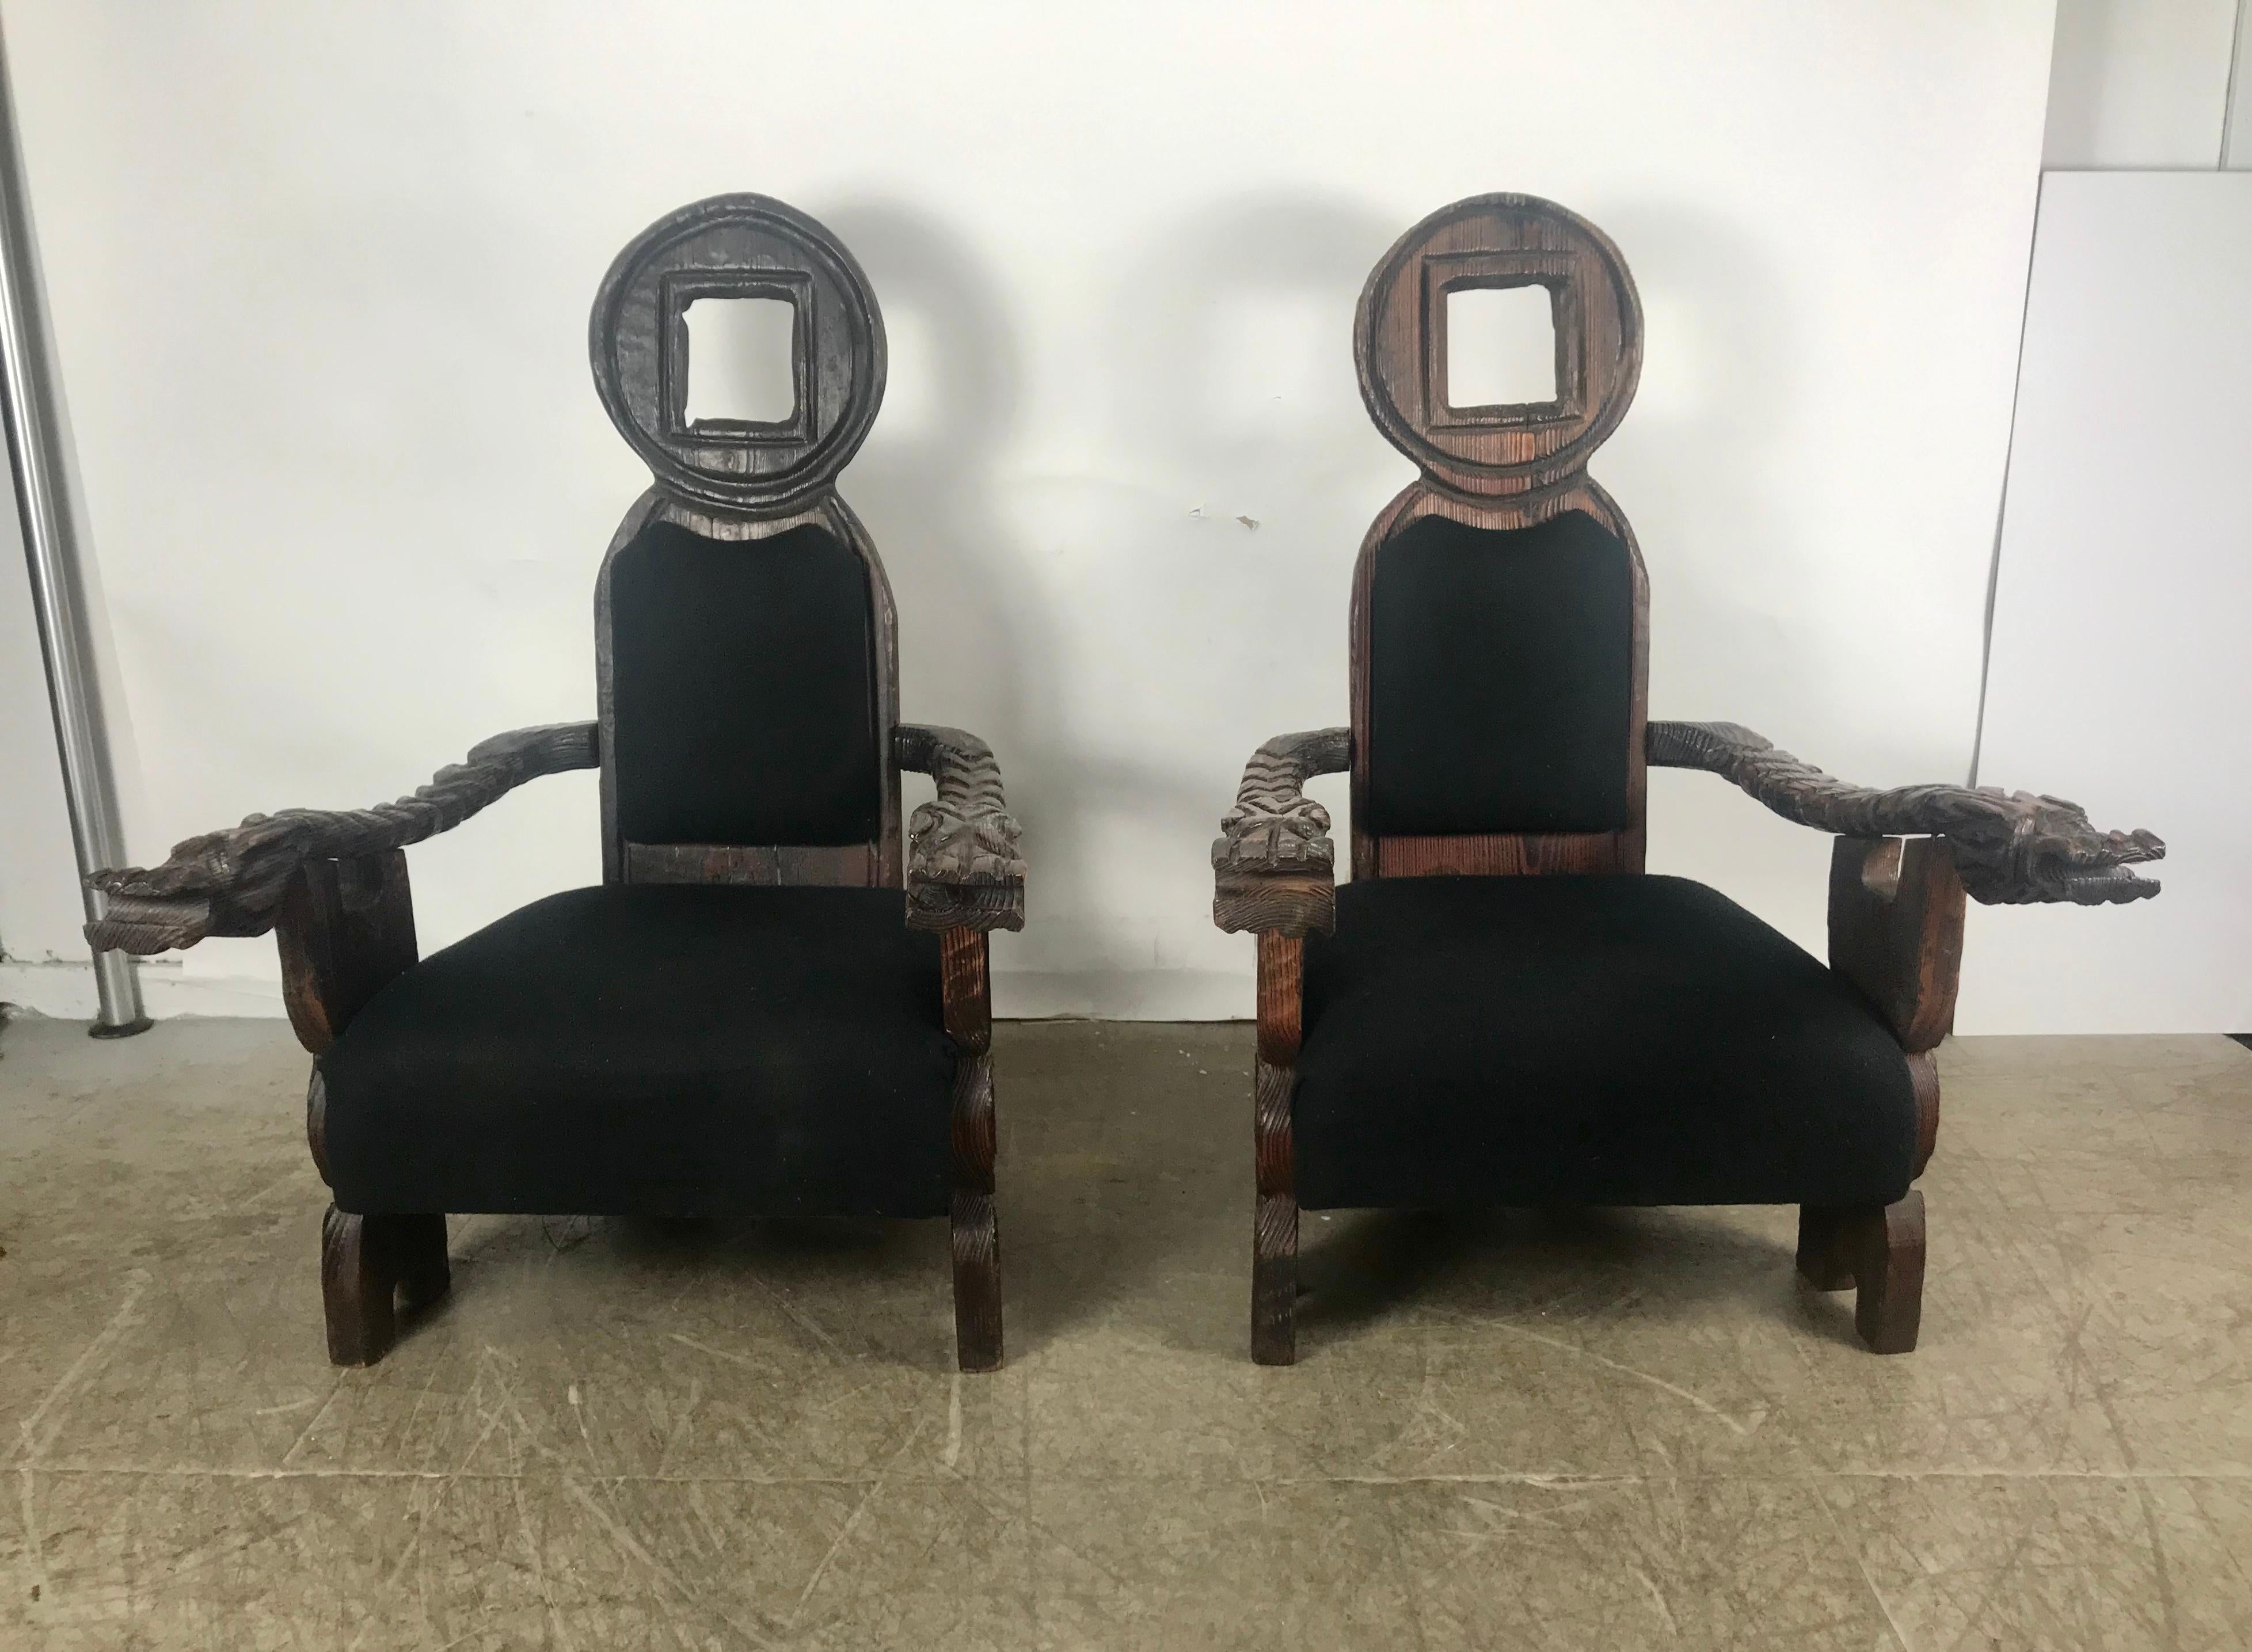 Unusual pair oversized, Teki Modern lounge chairs by William Westenhaver for Witco, definitely over the top, same chairs can be seen in Elvis Presley's Graceland. Crazy carved walnut, gargoyle design, retains original Witco tag, hand delivery avail